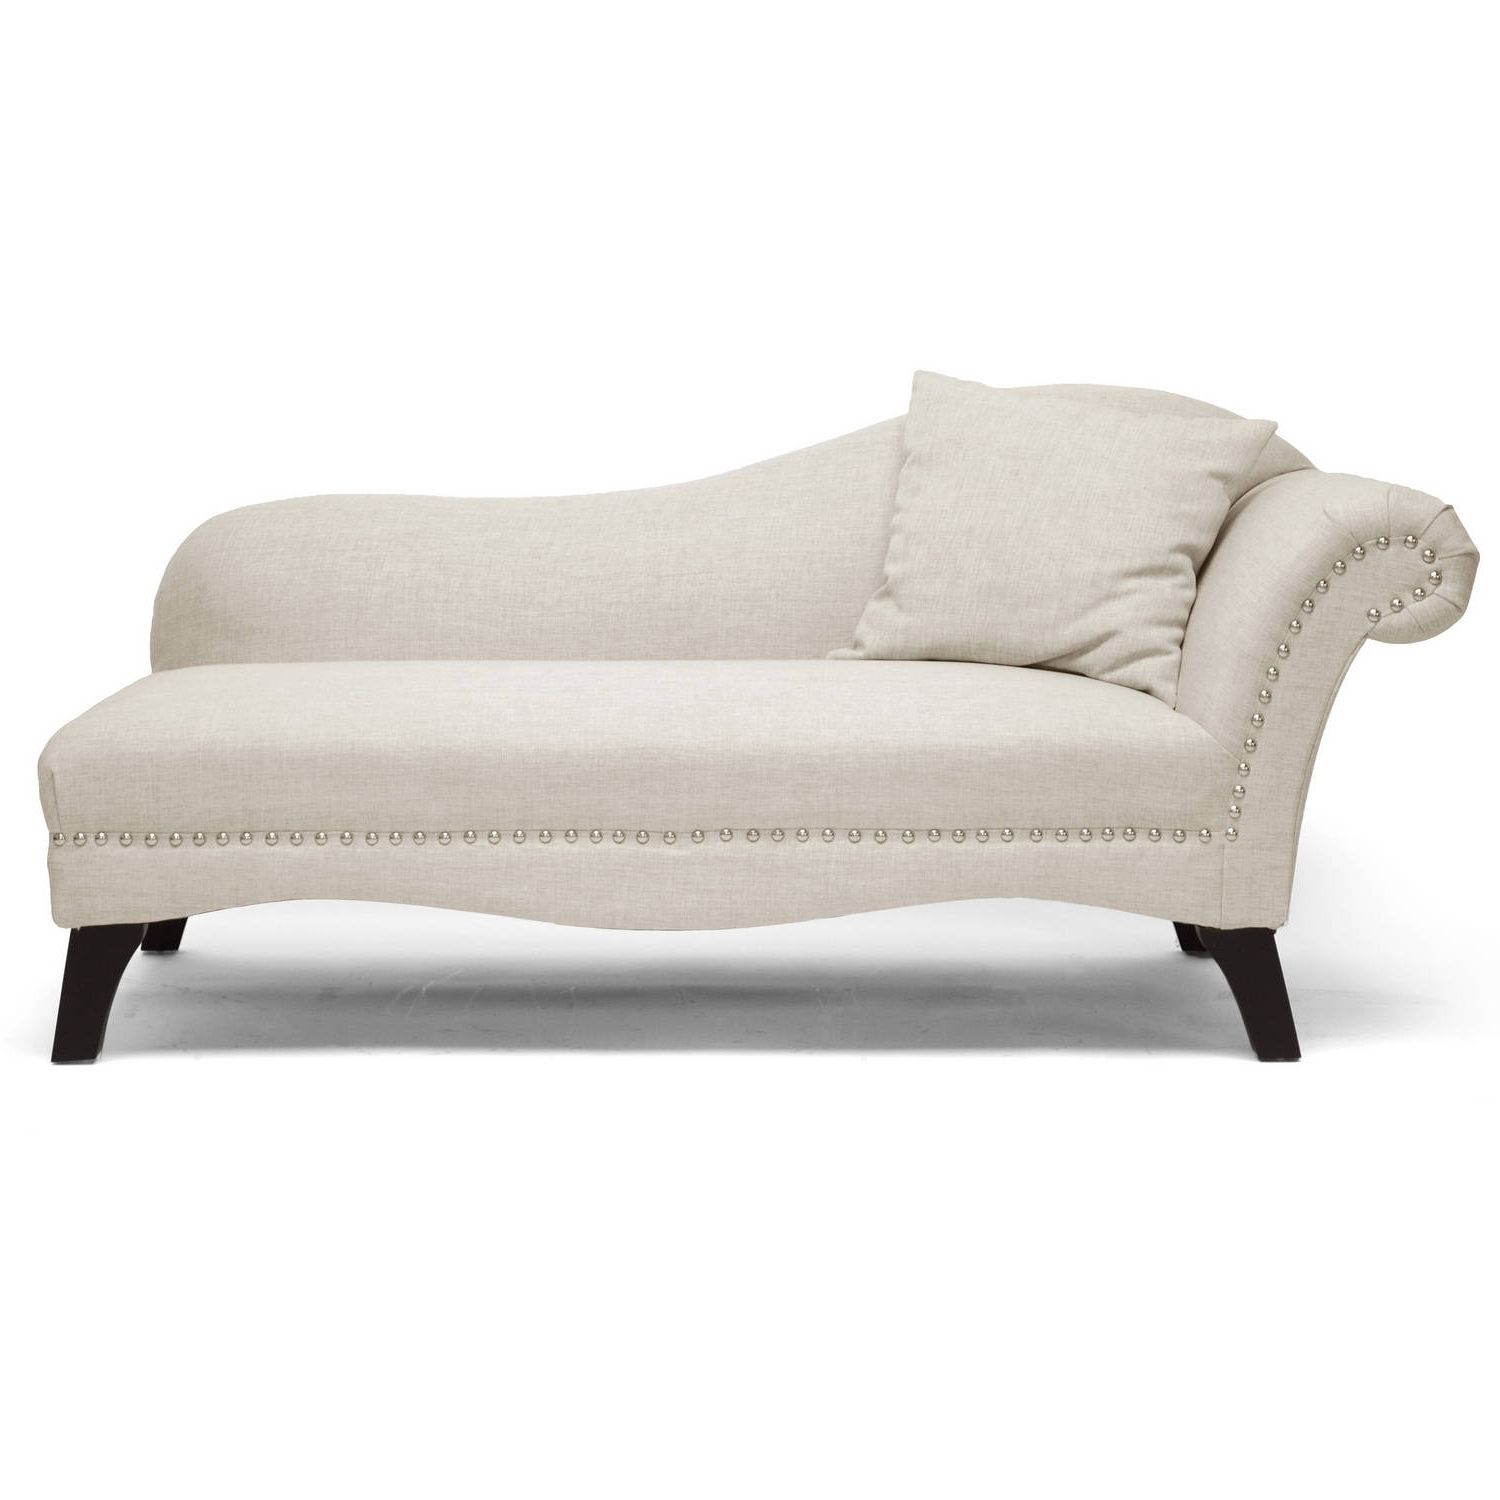 Widely Used Chaise Lounges – Walmart In Sofas With Chaise Lounge (View 5 of 15)